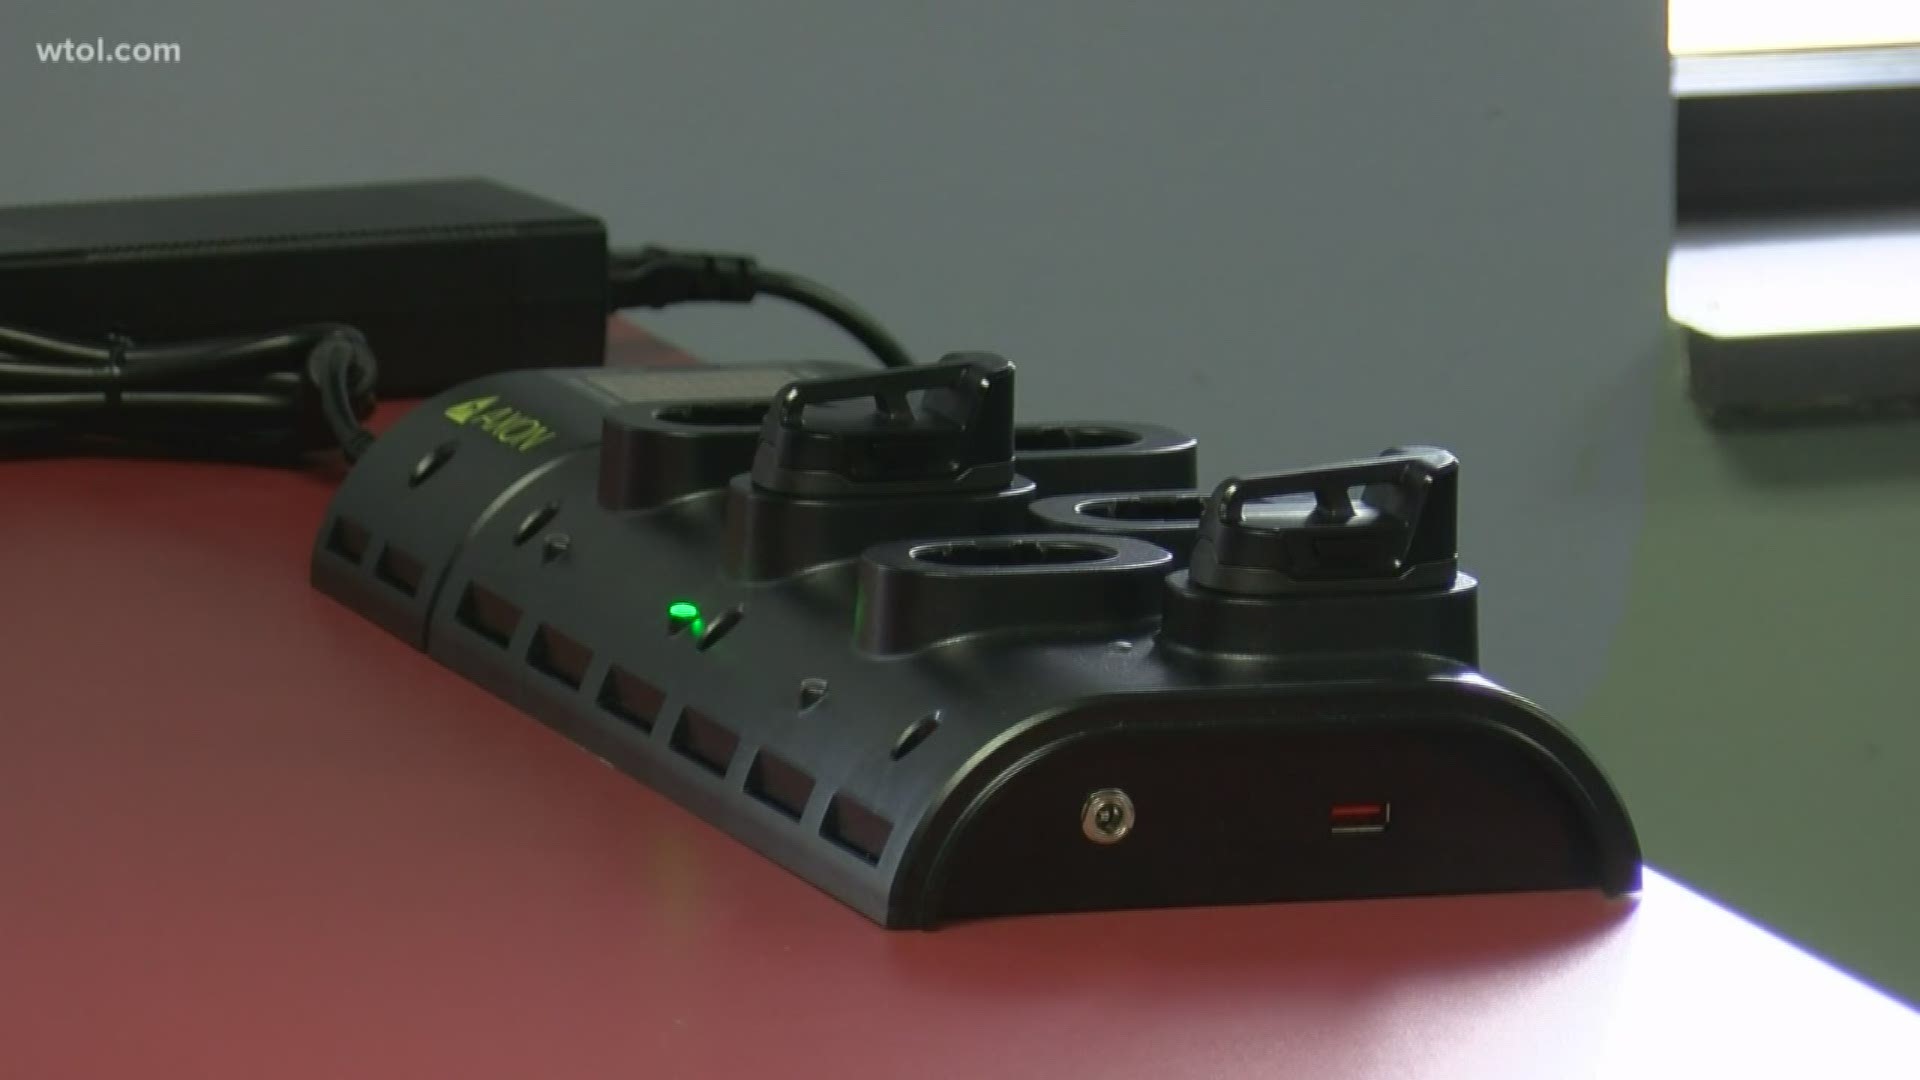 Right now when a taser batteries die, officers have to throw them away, each costing about $60 a piece.